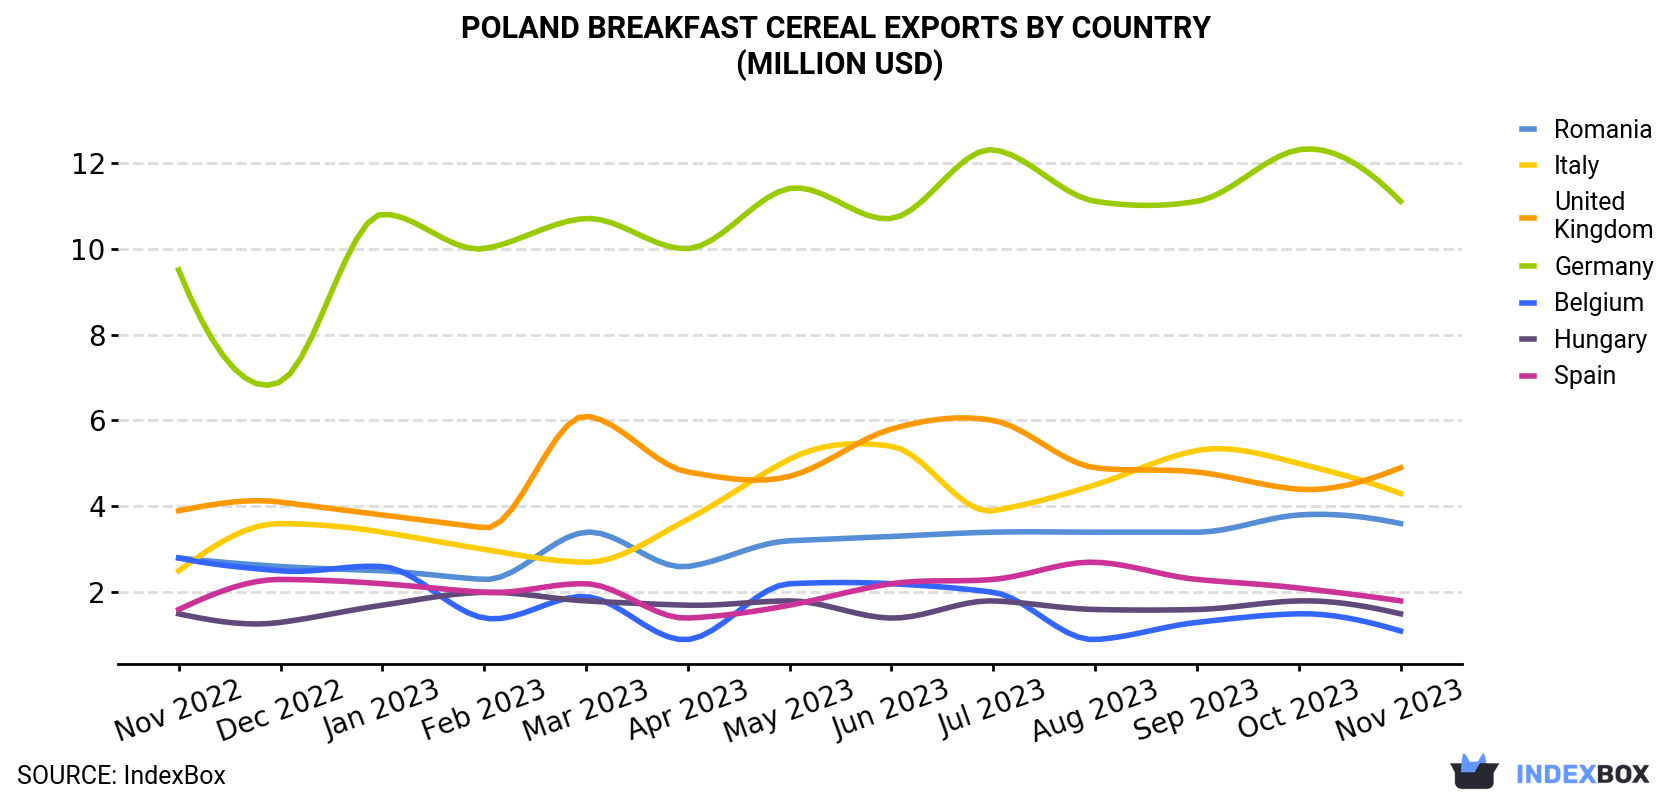 Poland Breakfast Cereal Exports By Country (Million USD)